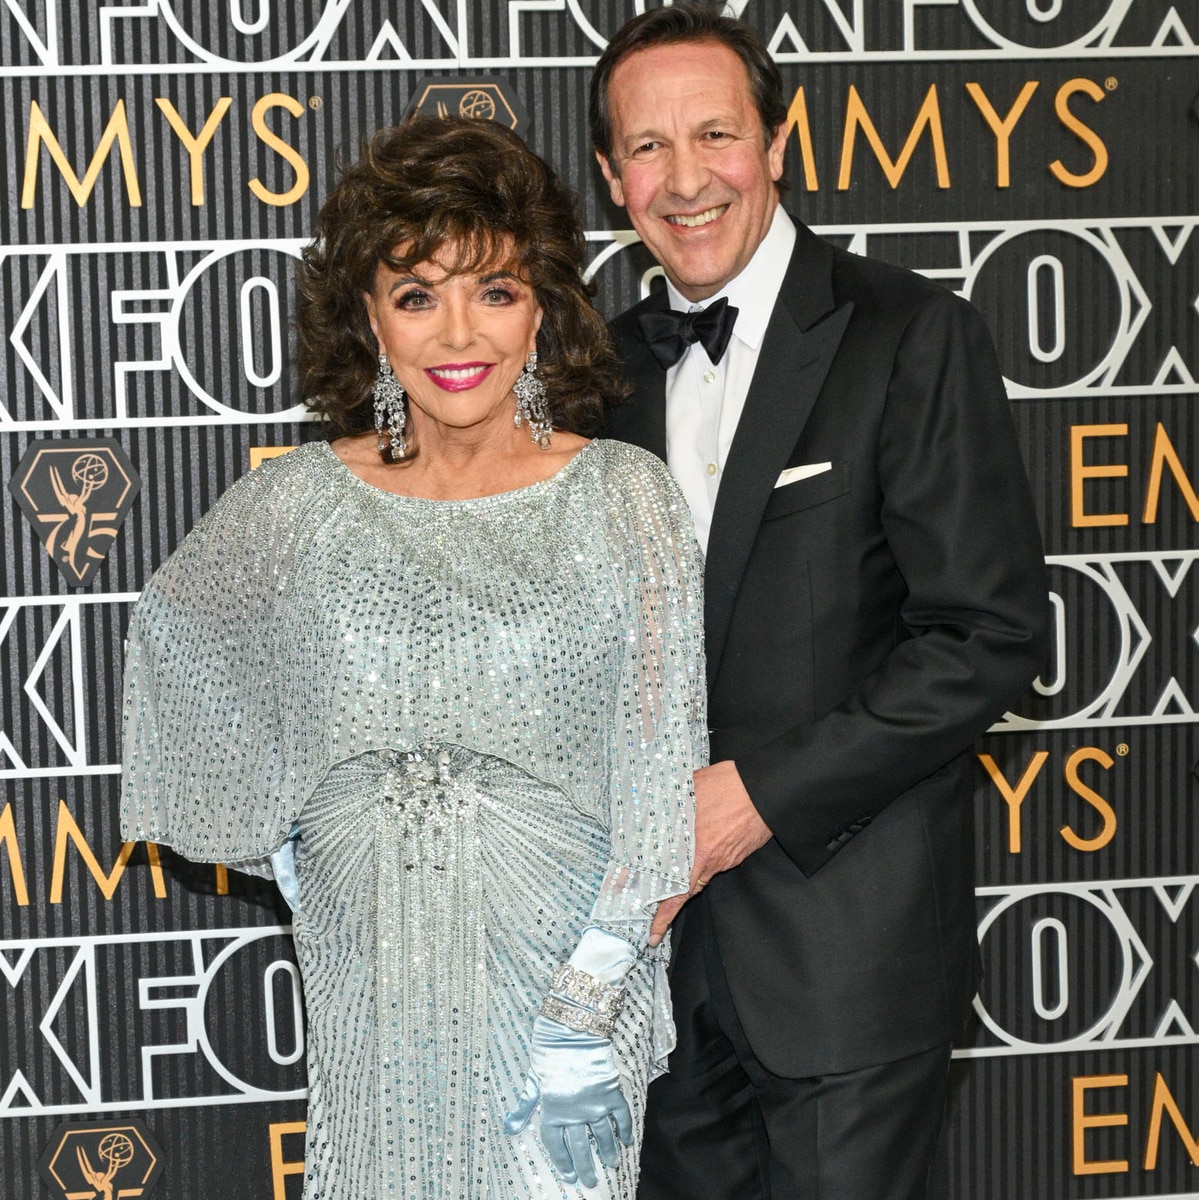 Joan Collins, Percy Gibson